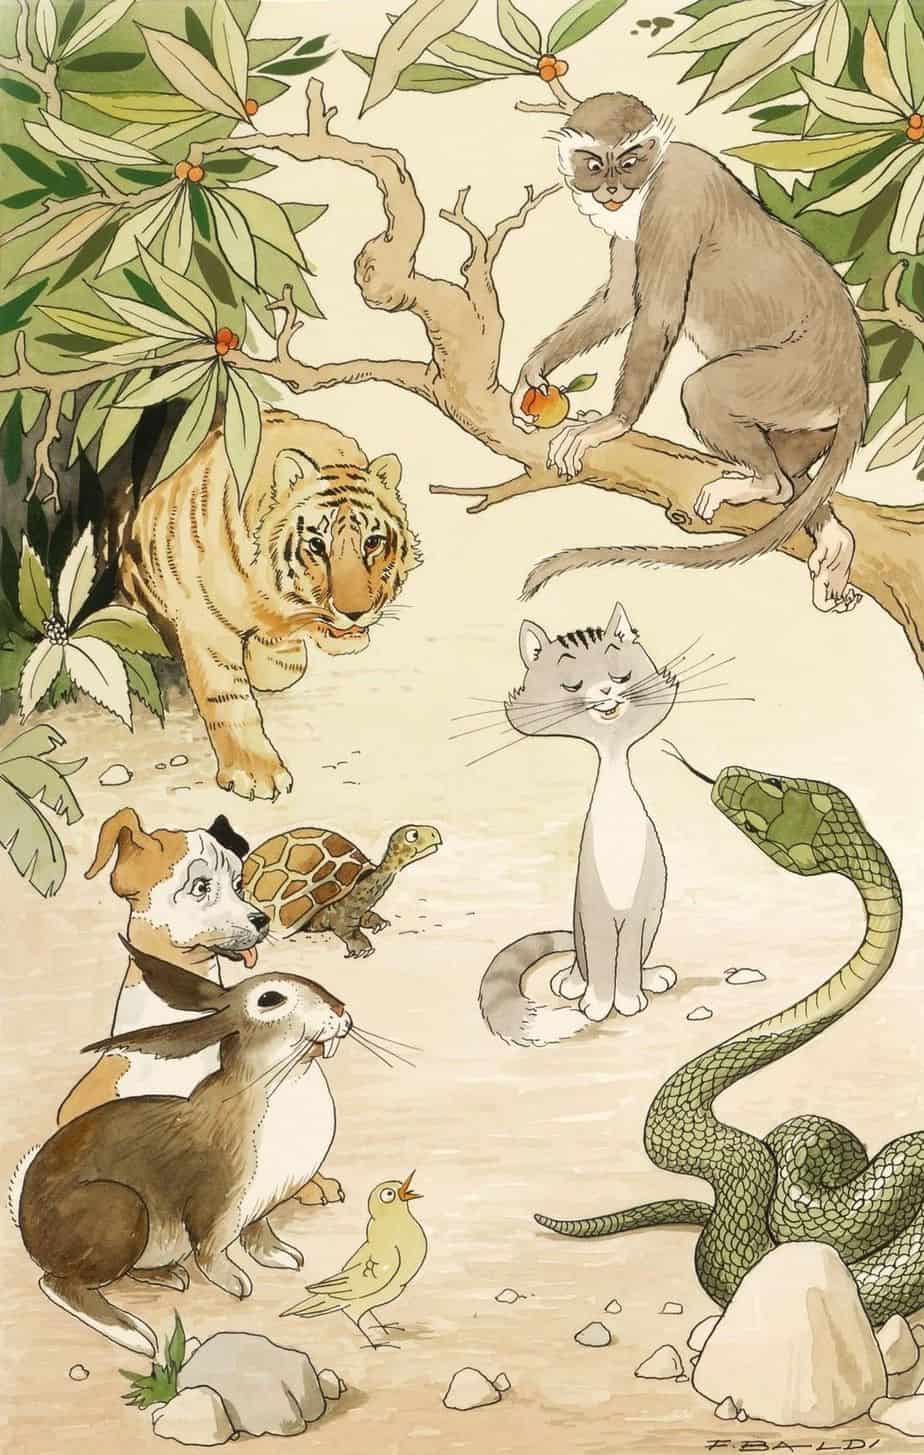 F. Baldi - Original illustration for Rudyard Kipling’s Just So Stories, published by Capitol publishing house in 1958 jungle